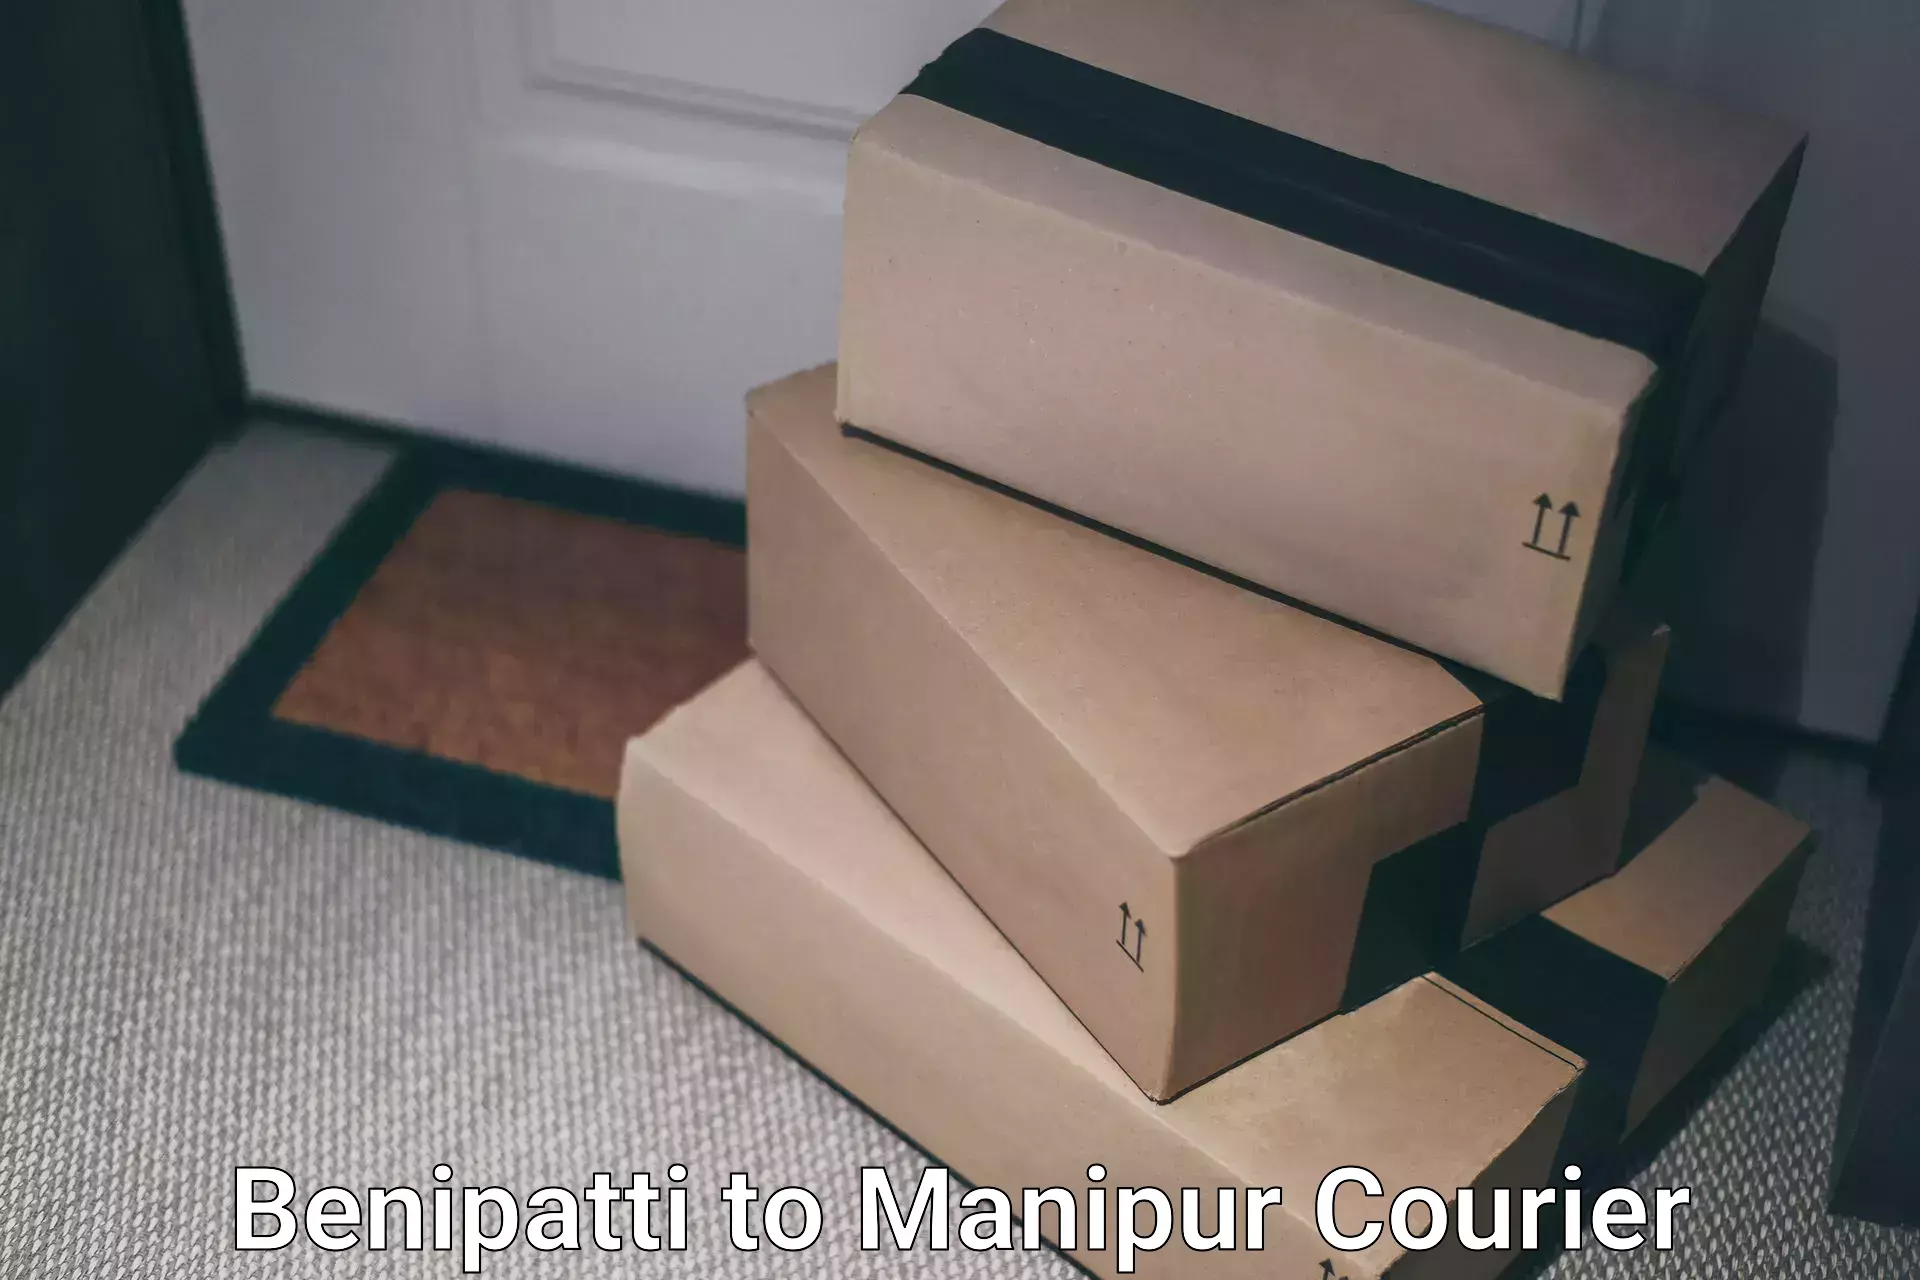 Full-service courier options Benipatti to Manipur